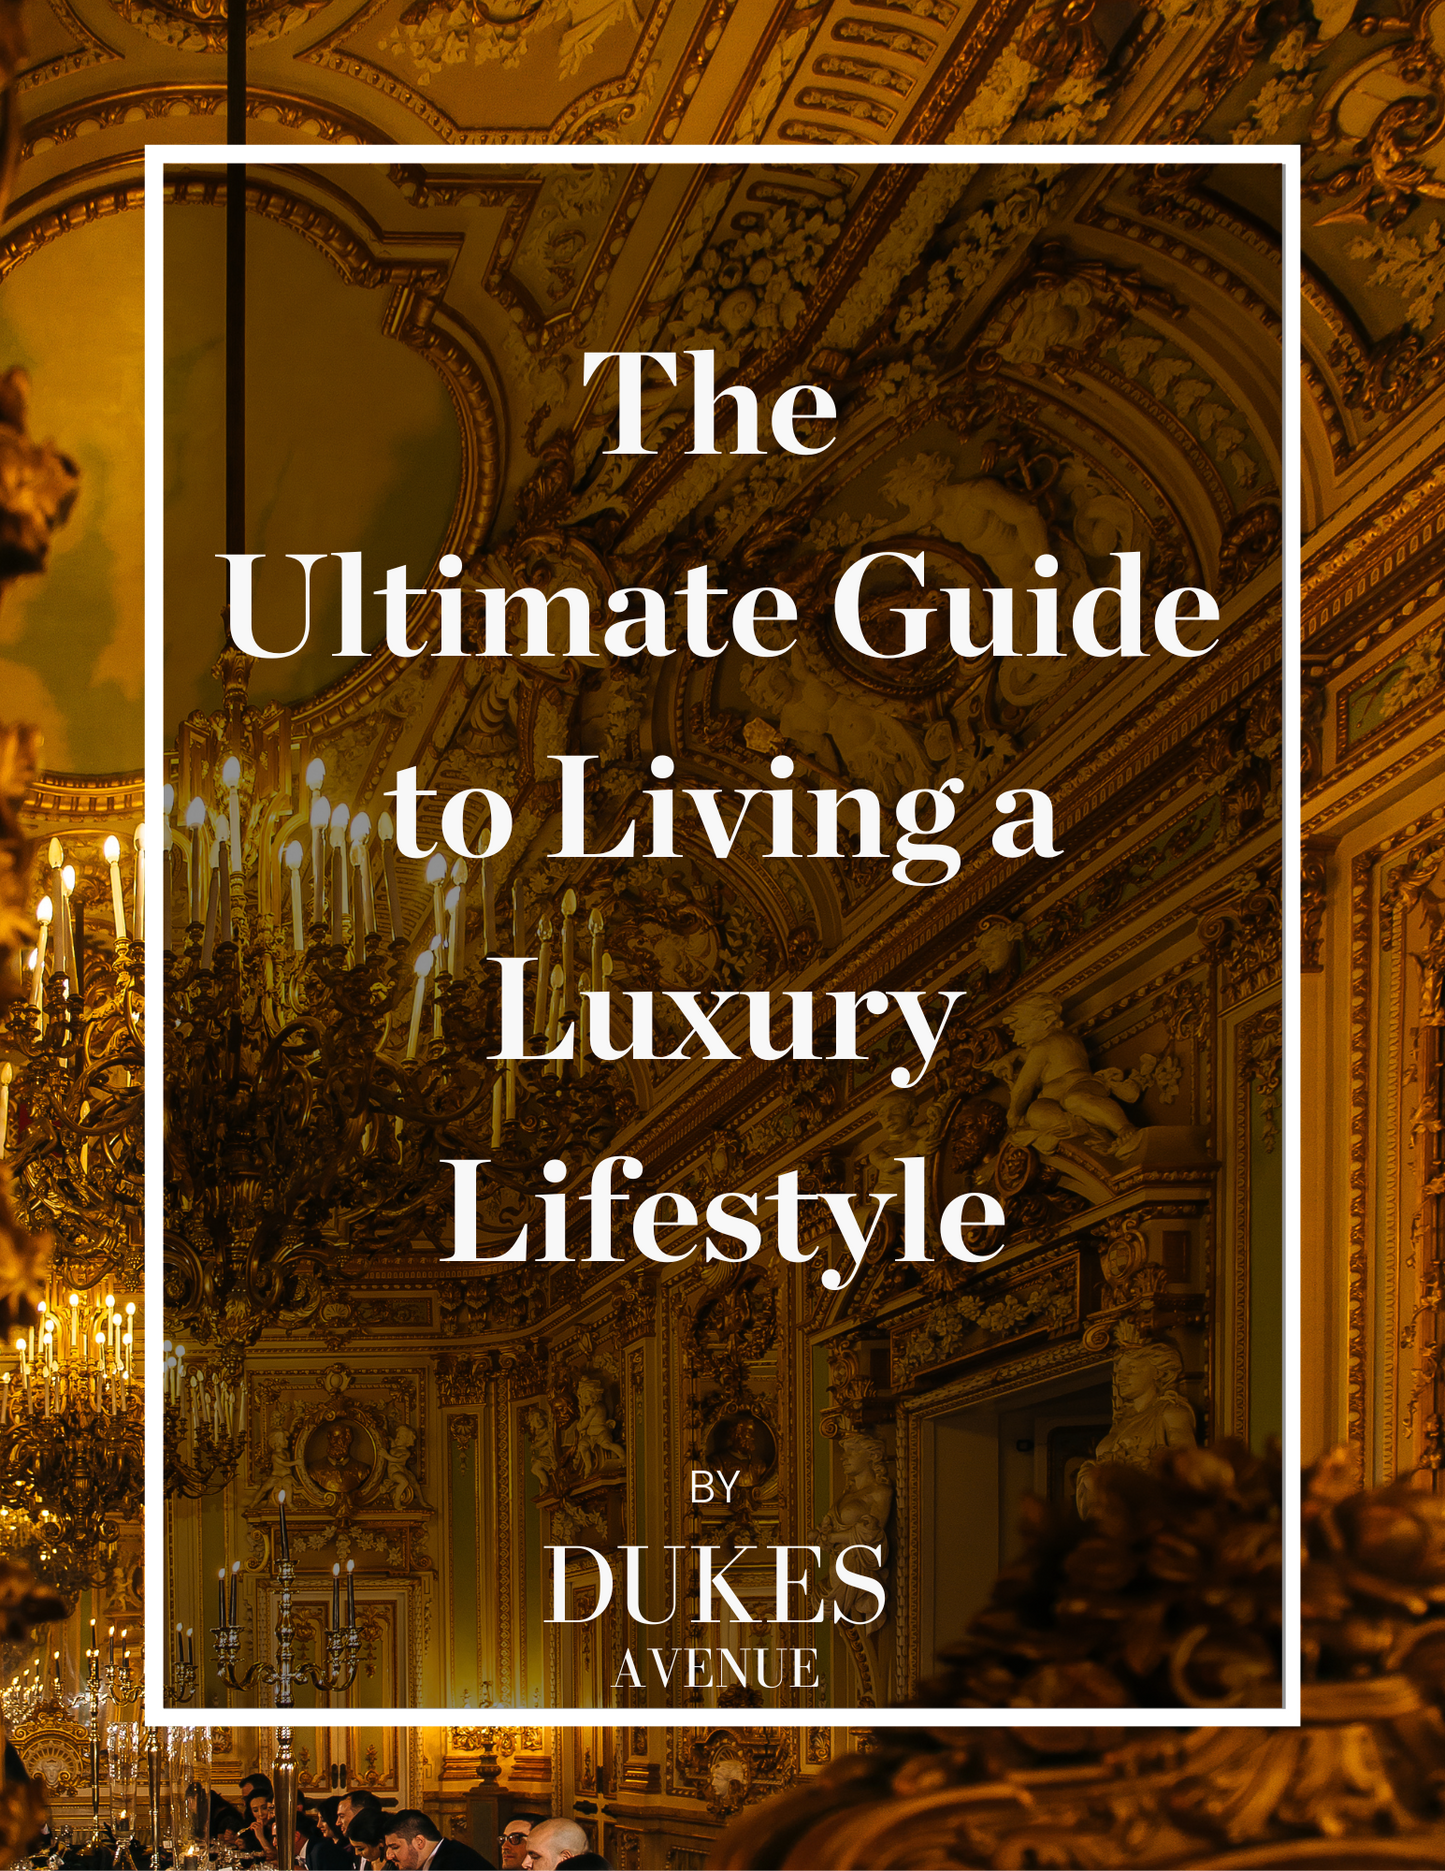 The Ultimate Guide to Living a Luxury Lifestyle